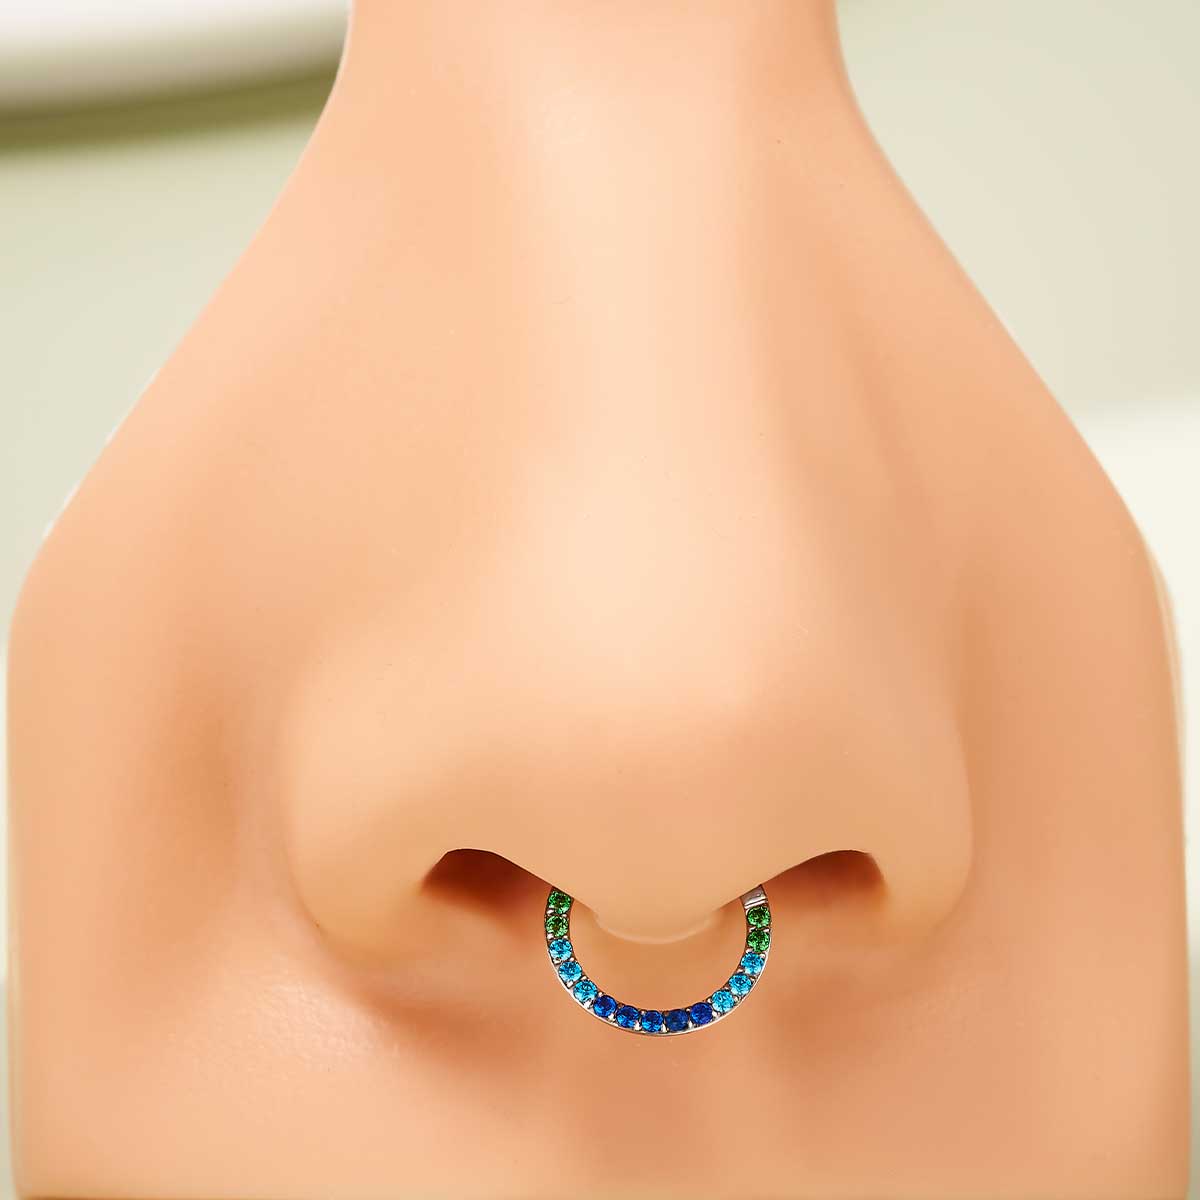 blue and green septum piercing